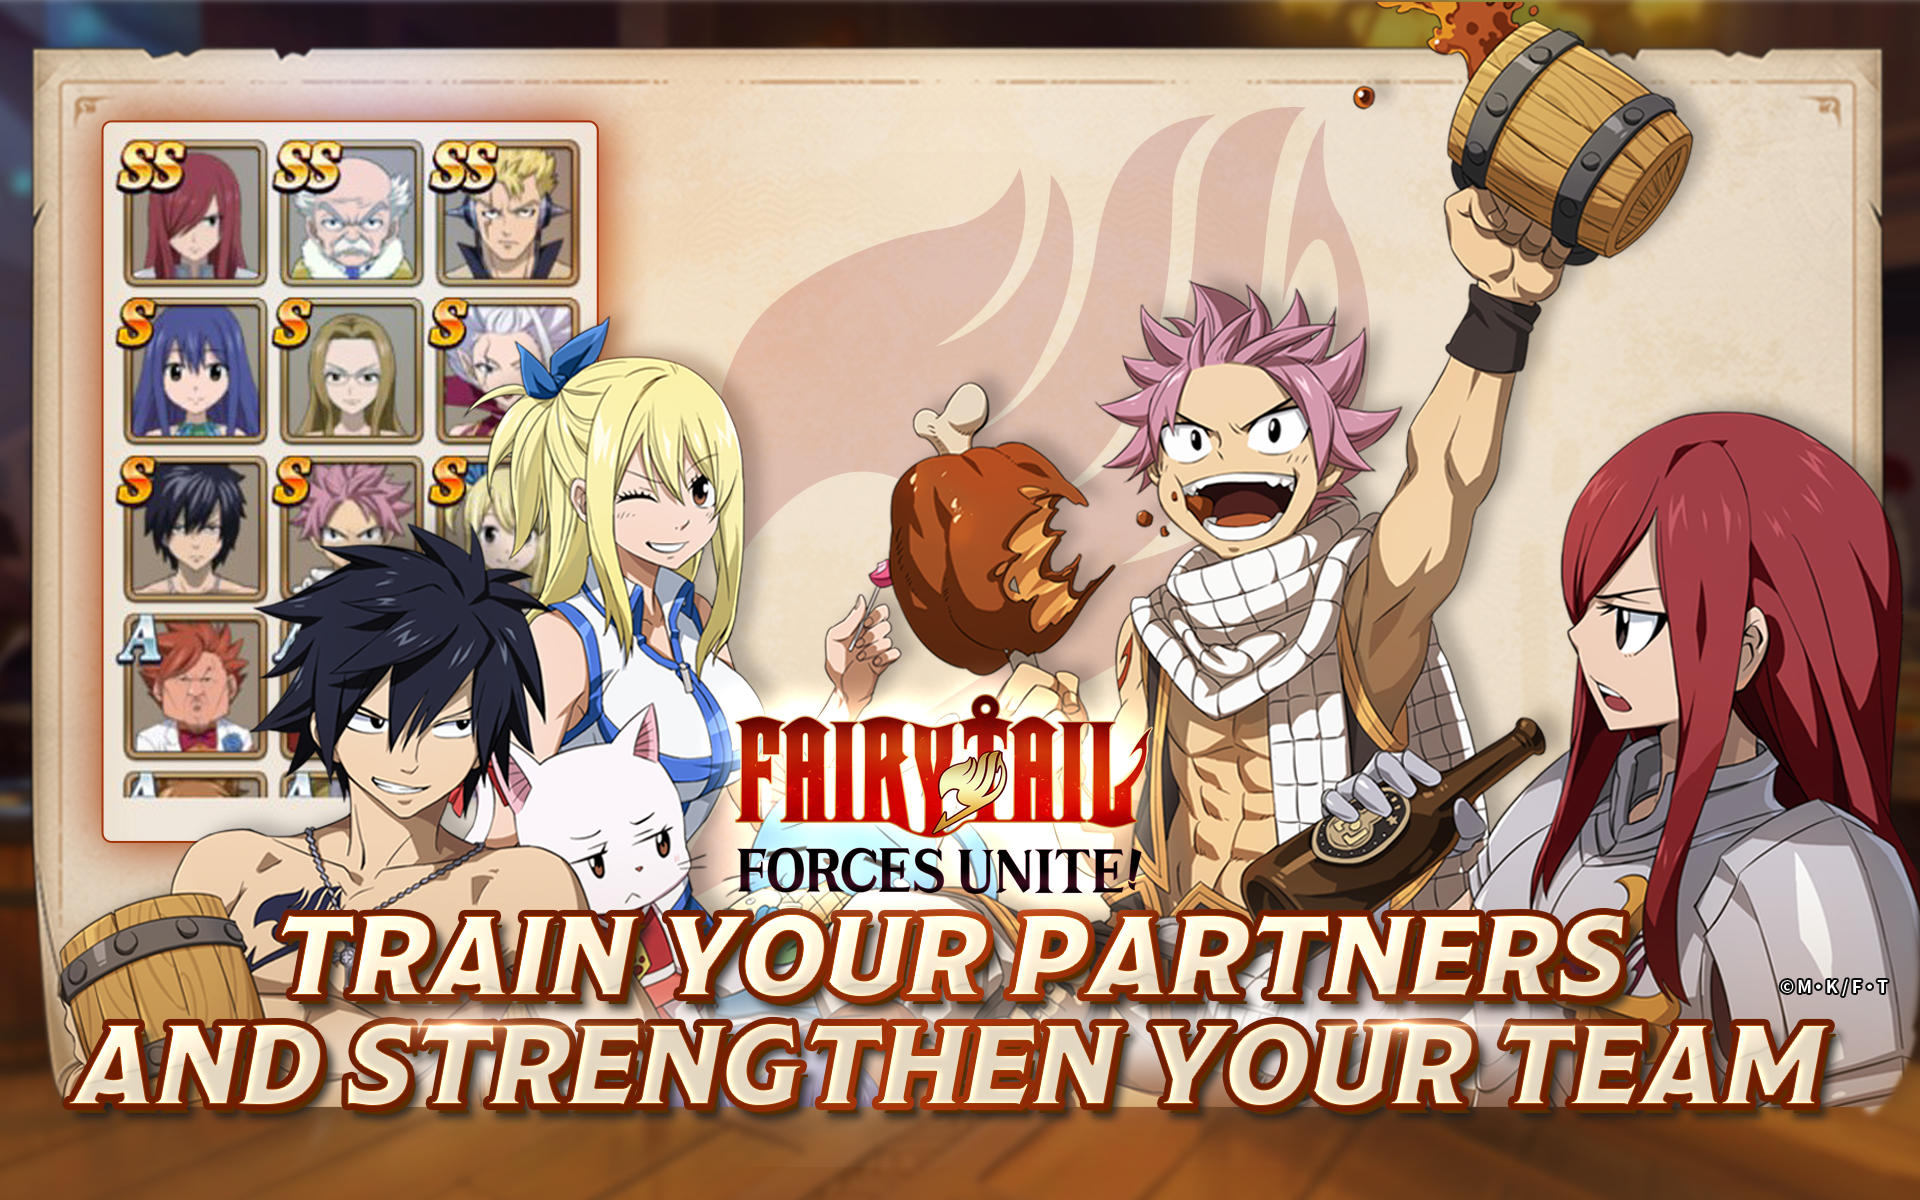 HOW TO DOWNLOAD & PLAY FAIRY TAIL FIGHTING 2022 GACHA GAME (Android/iOS) 